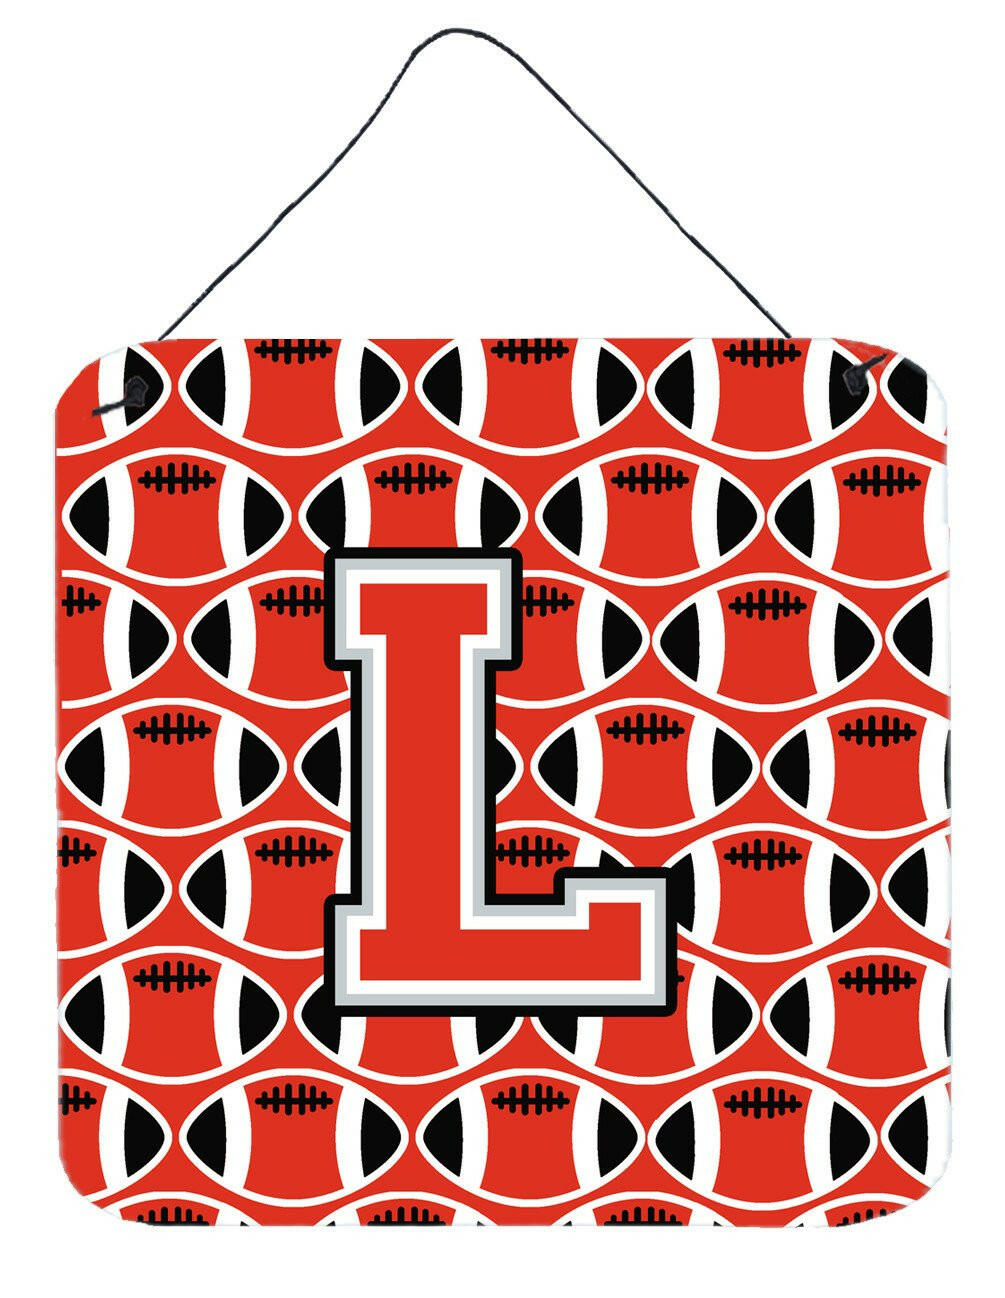 Letter L Football Scarlet and Grey Wall or Door Hanging Prints CJ1067-LDS66 by Caroline's Treasures